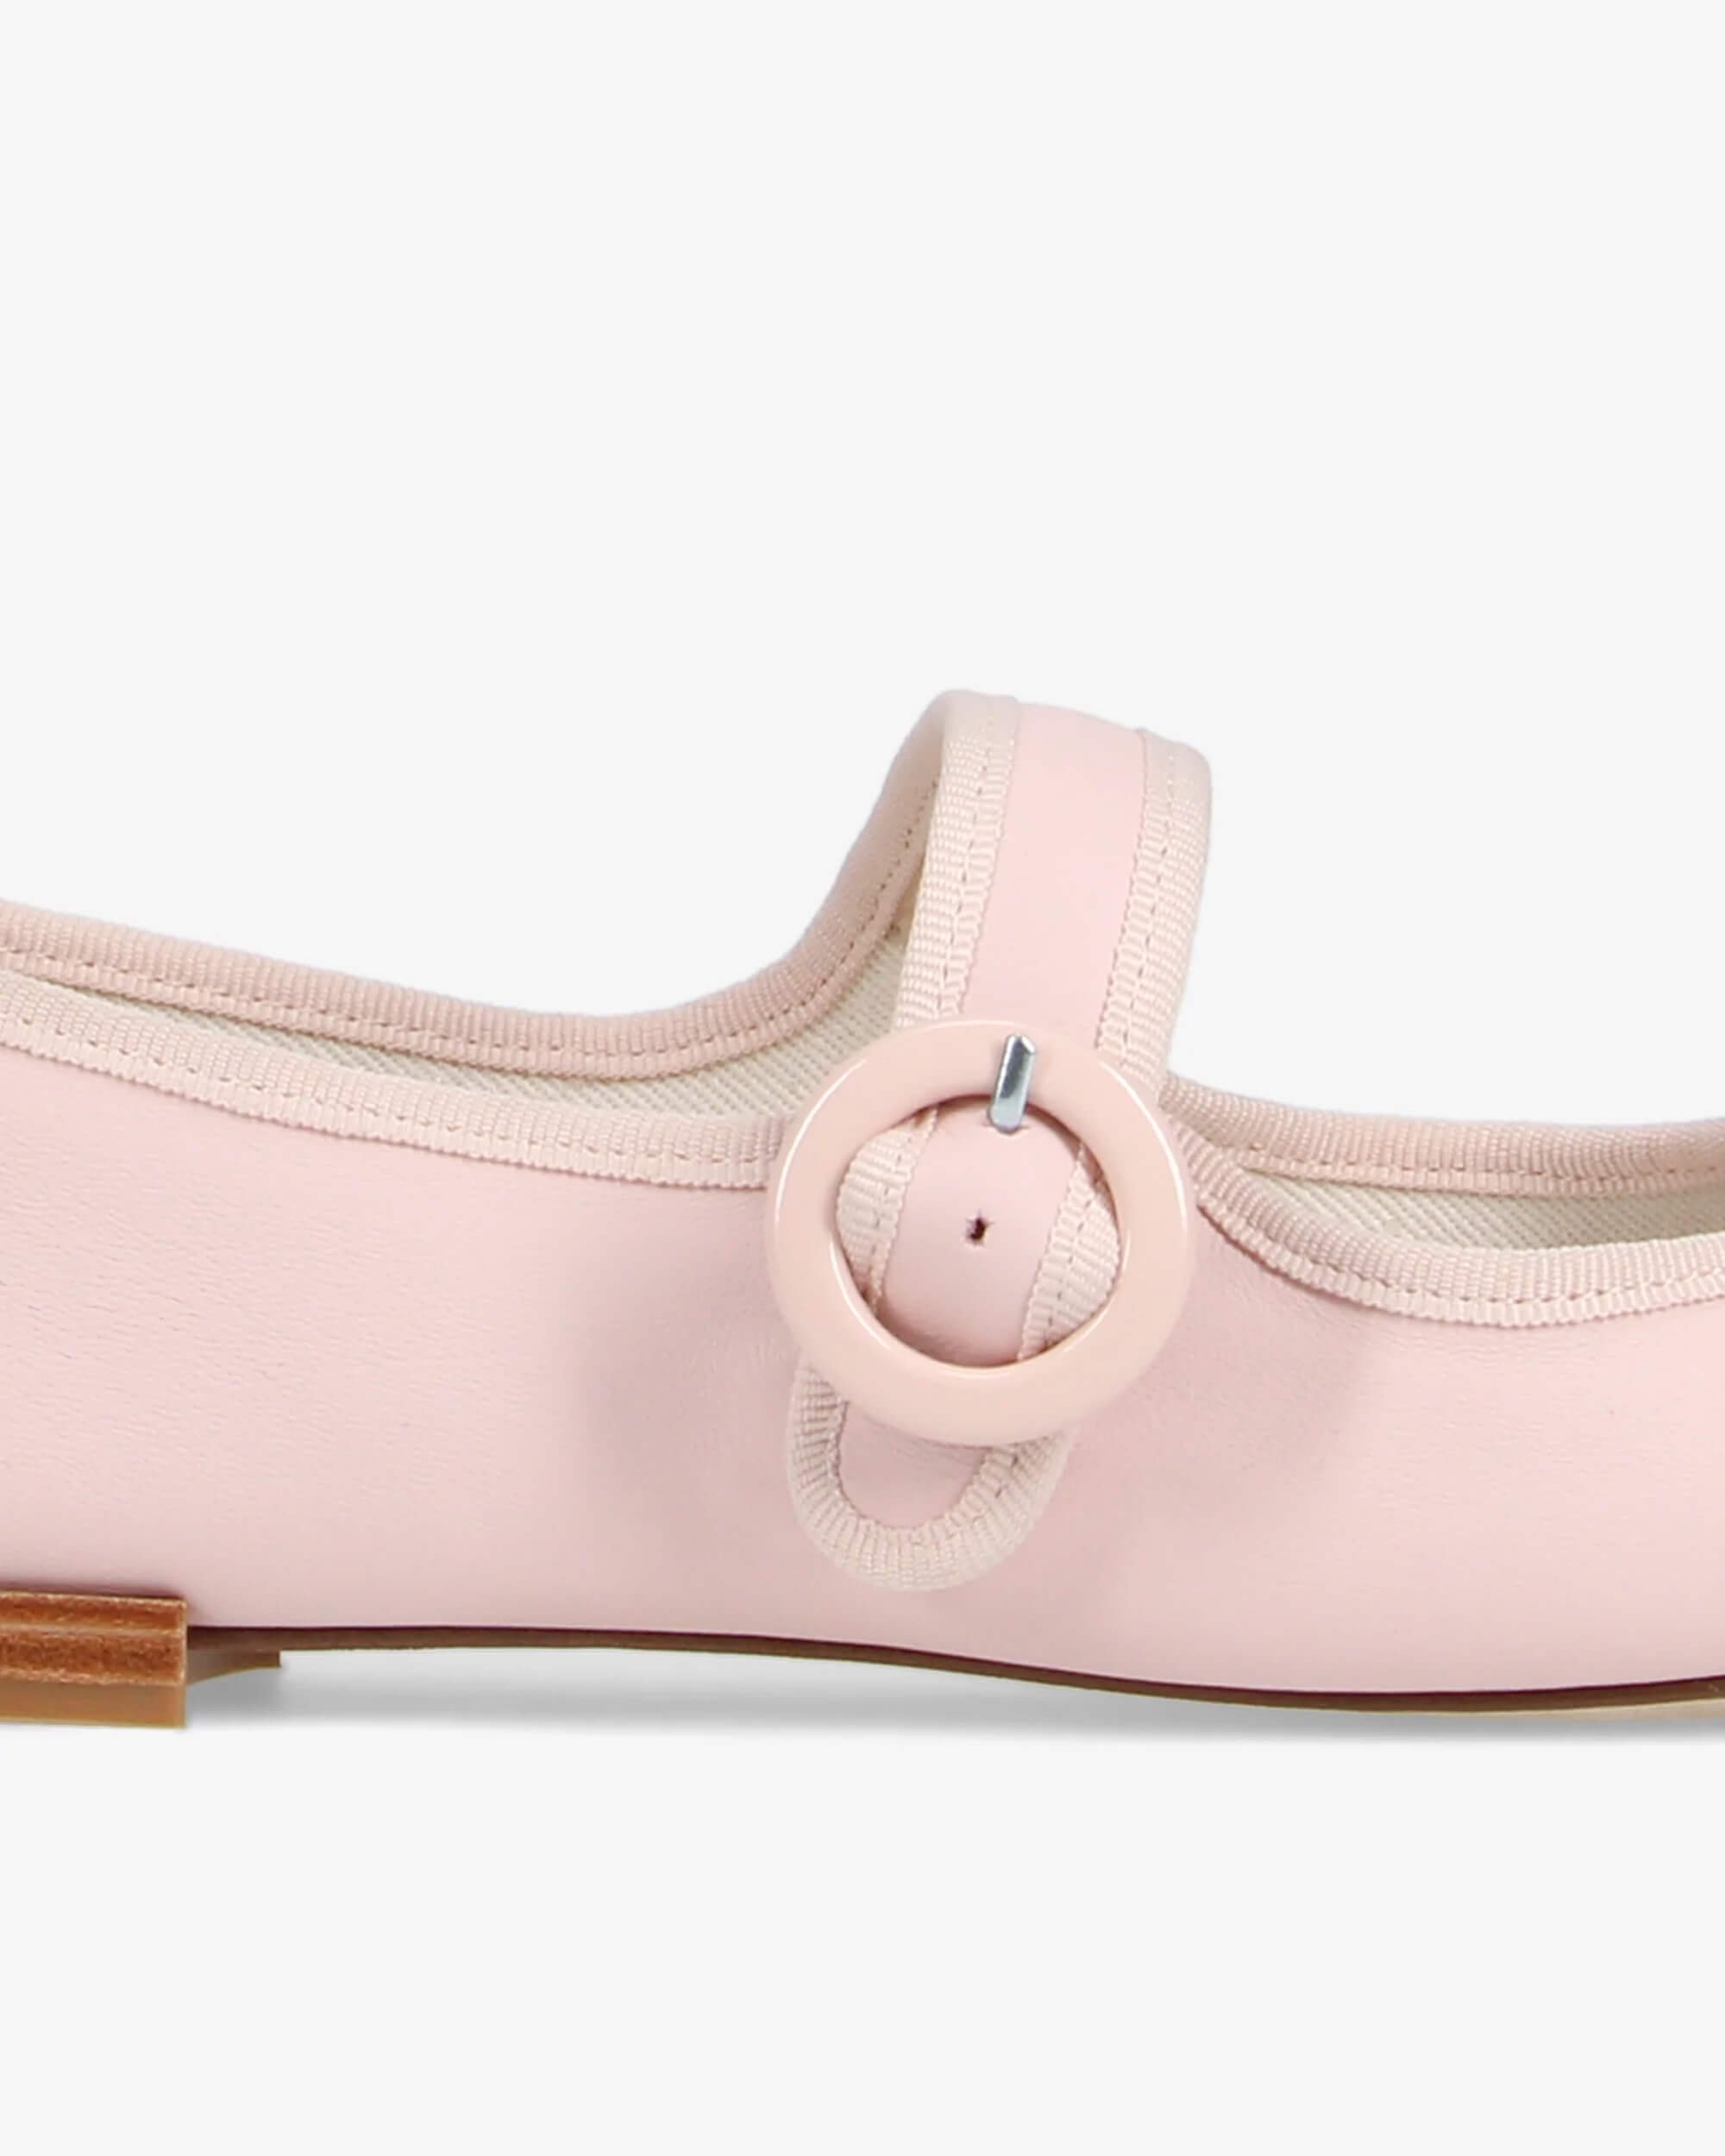 Shoes Collection – Repetto